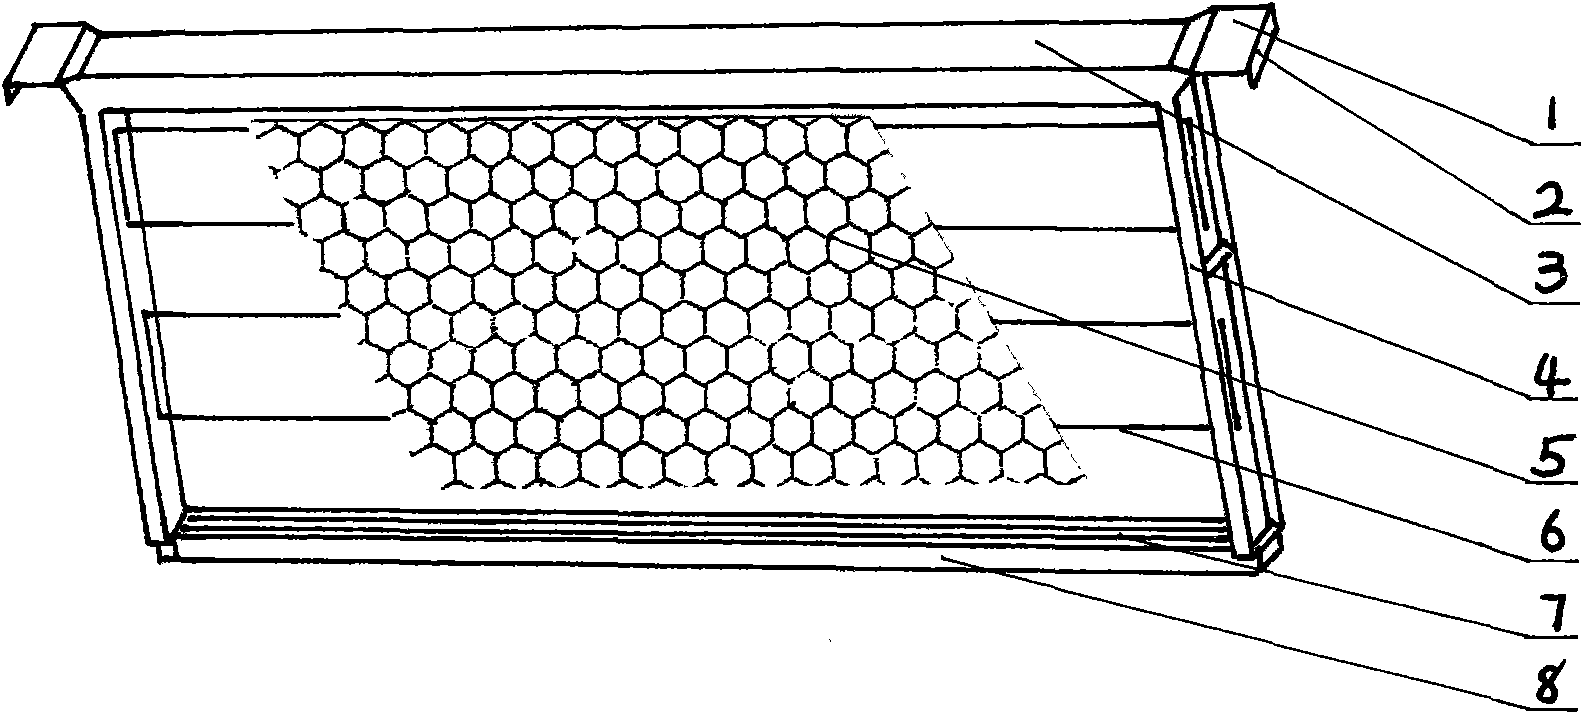 Comb frame and comb foundation sheet